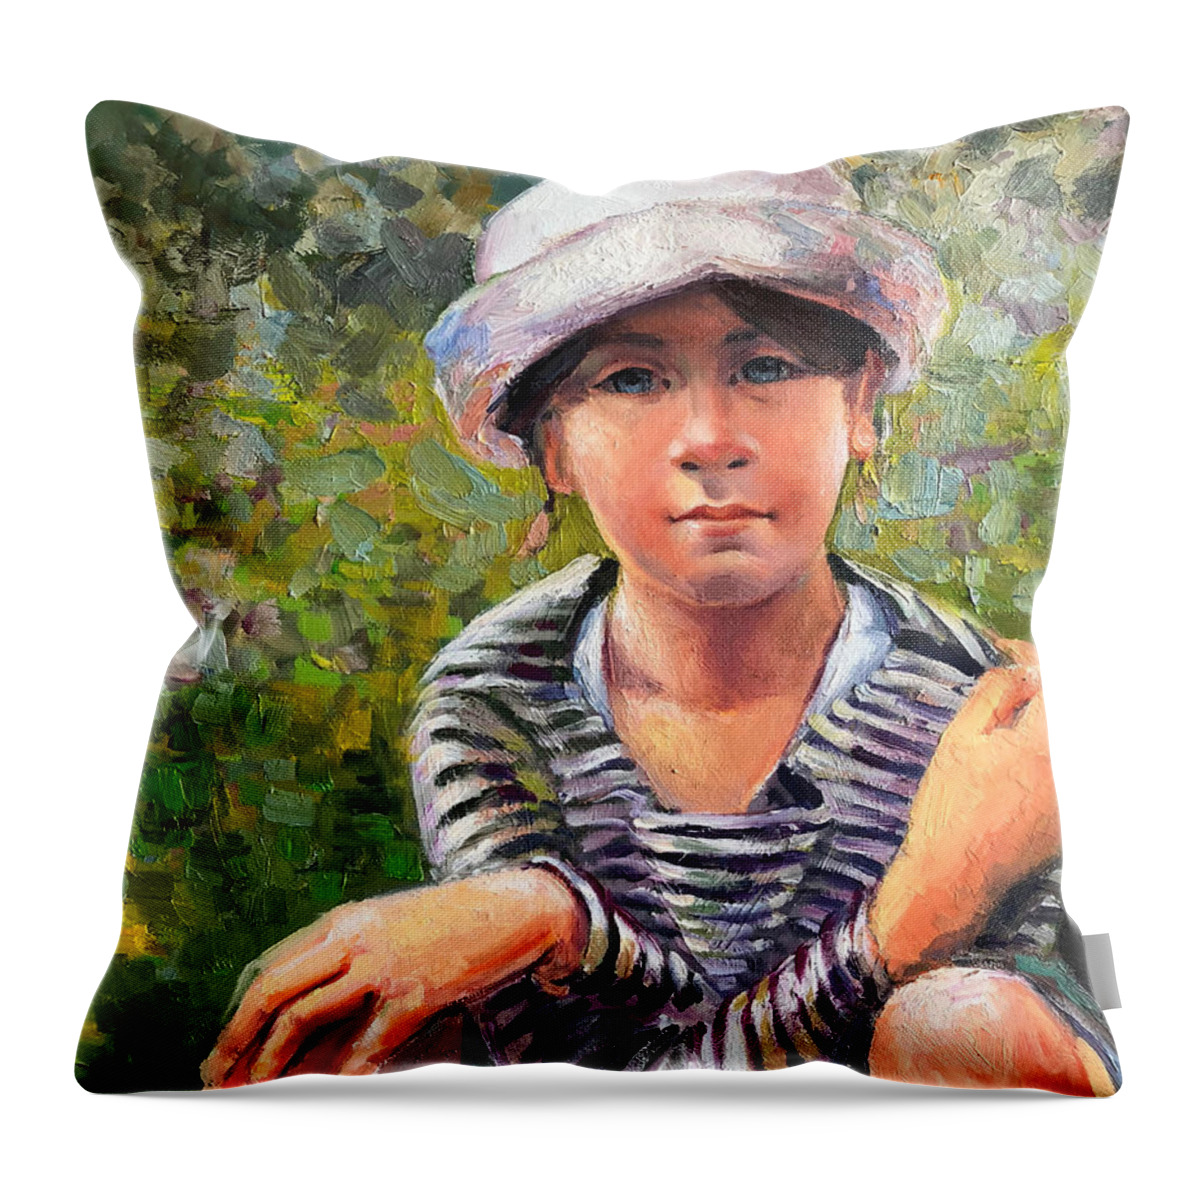 Portrait Throw Pillow featuring the painting The Blue-eyed Little Girl by Vali Irina Ciobanu